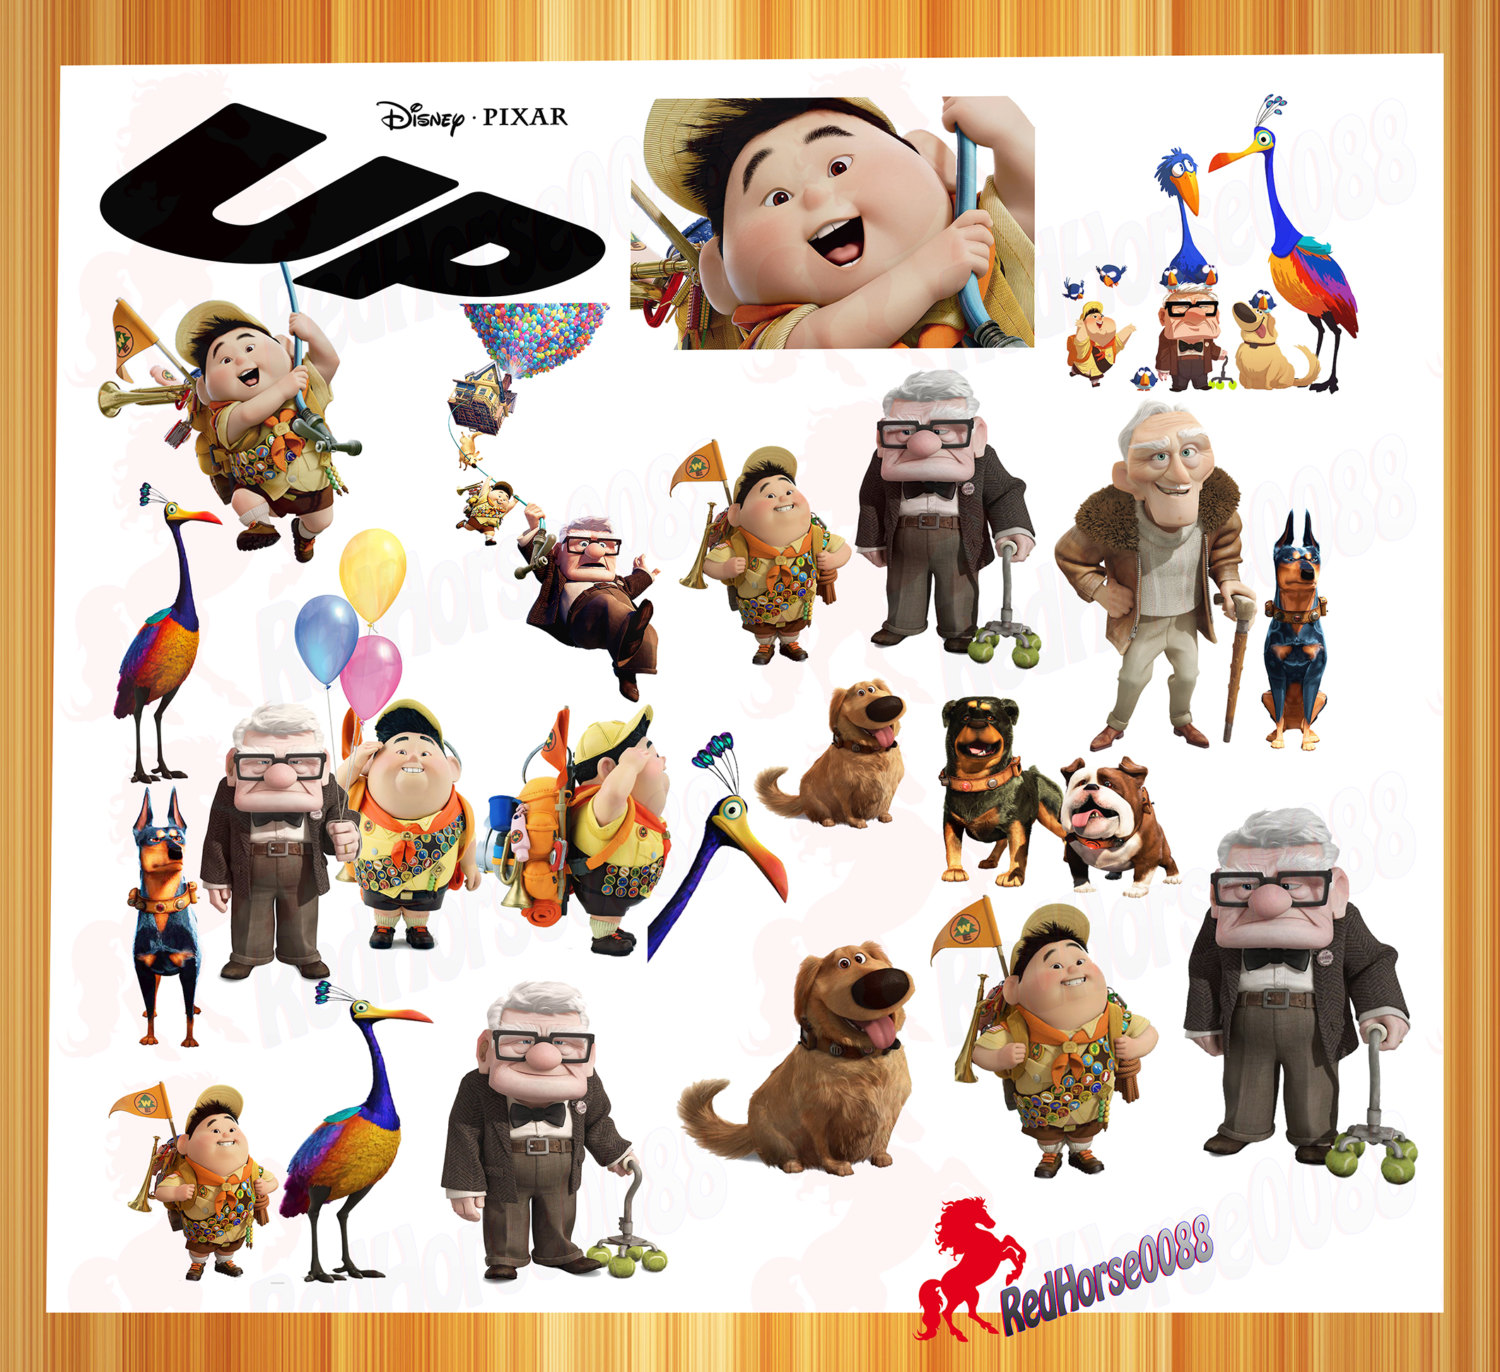 20 Disney Pixar Up Characters Png Images Files For By Redhorse0088